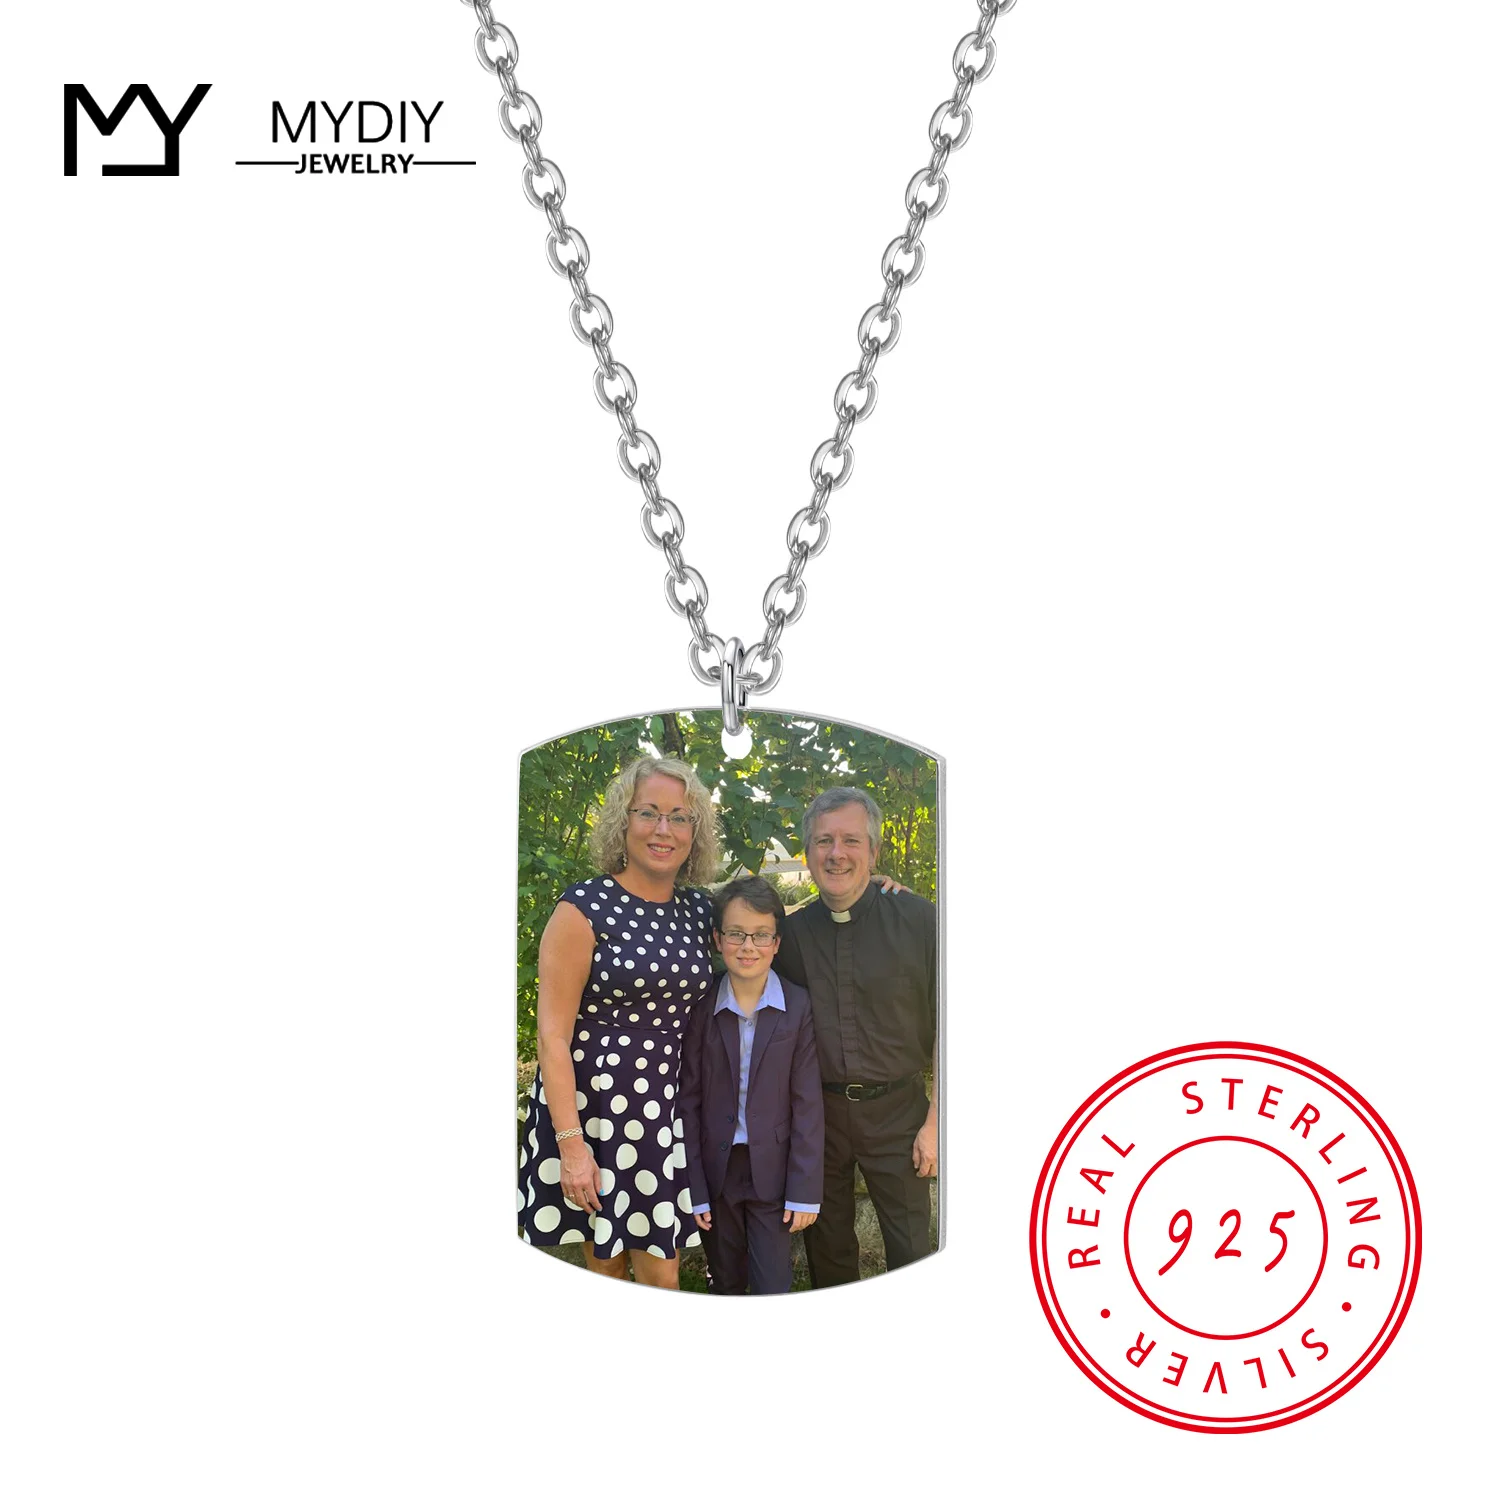 

MYDIY 925 Sterling Silver Trendy PHOTO Pendant Necklaces Customize customding'h For Family Jewelry Baby Name Gift 2021 TREND